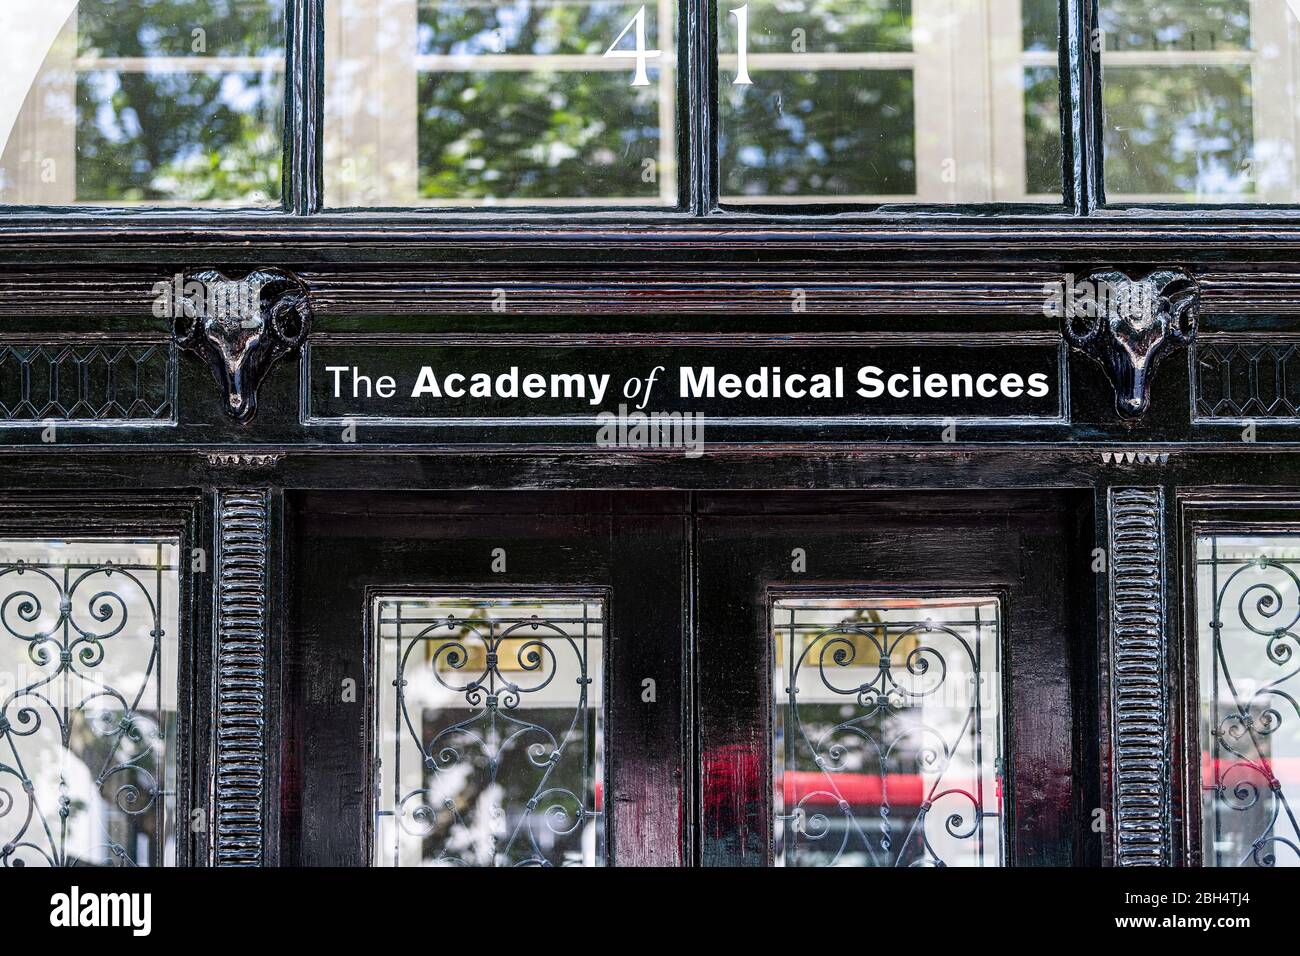 London, UK - June 24, 2018: Building exterior and sign closeup for the academy of medical sciences on Portland place street road Stock Photo